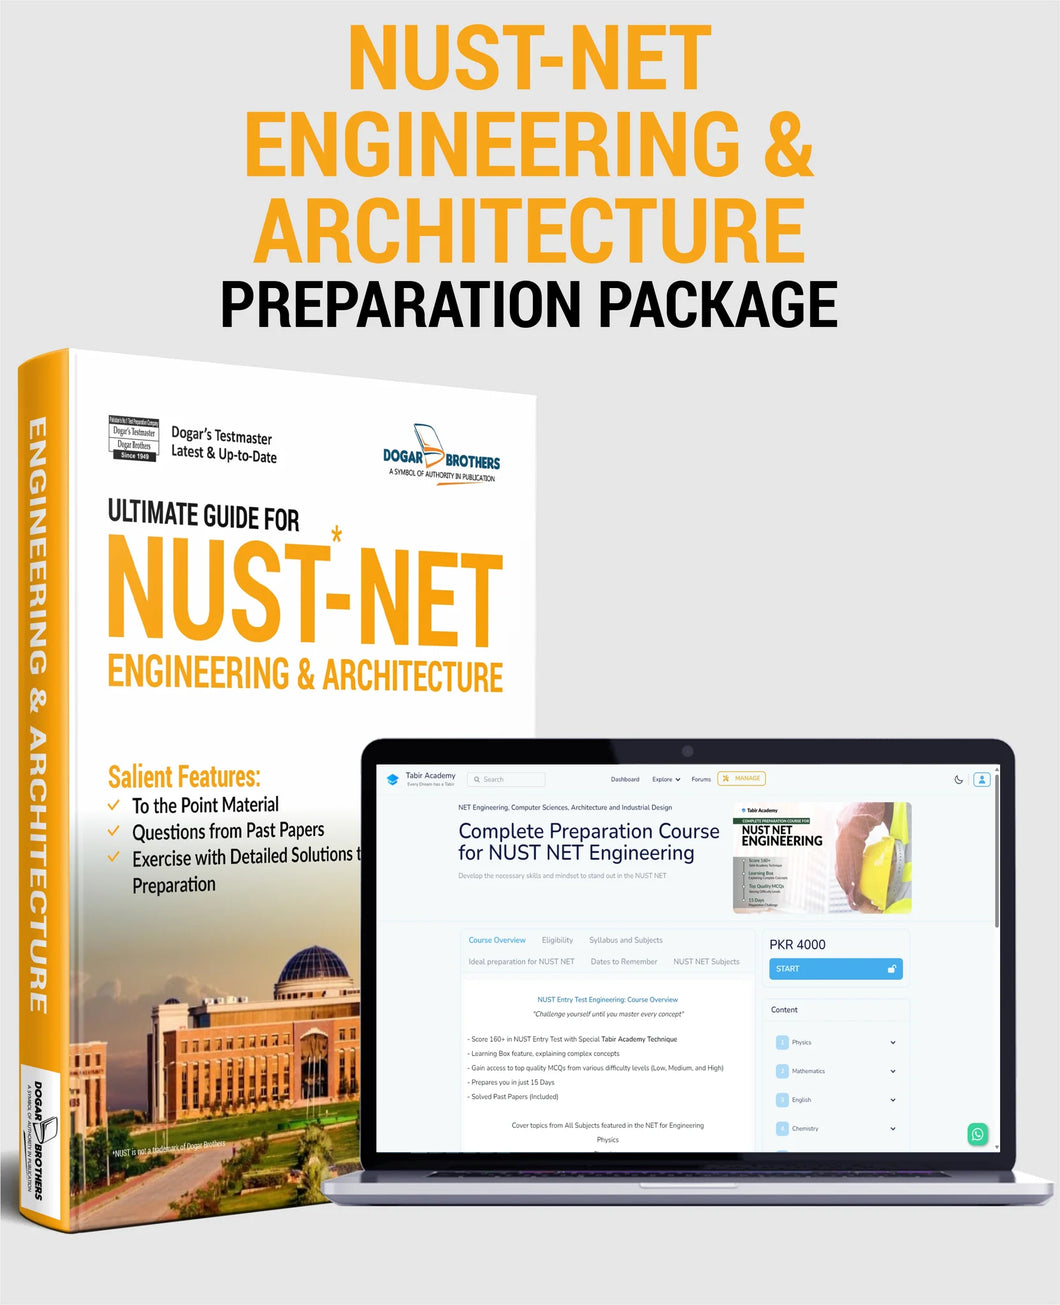 NUST NET Engineering & Architecture Guide